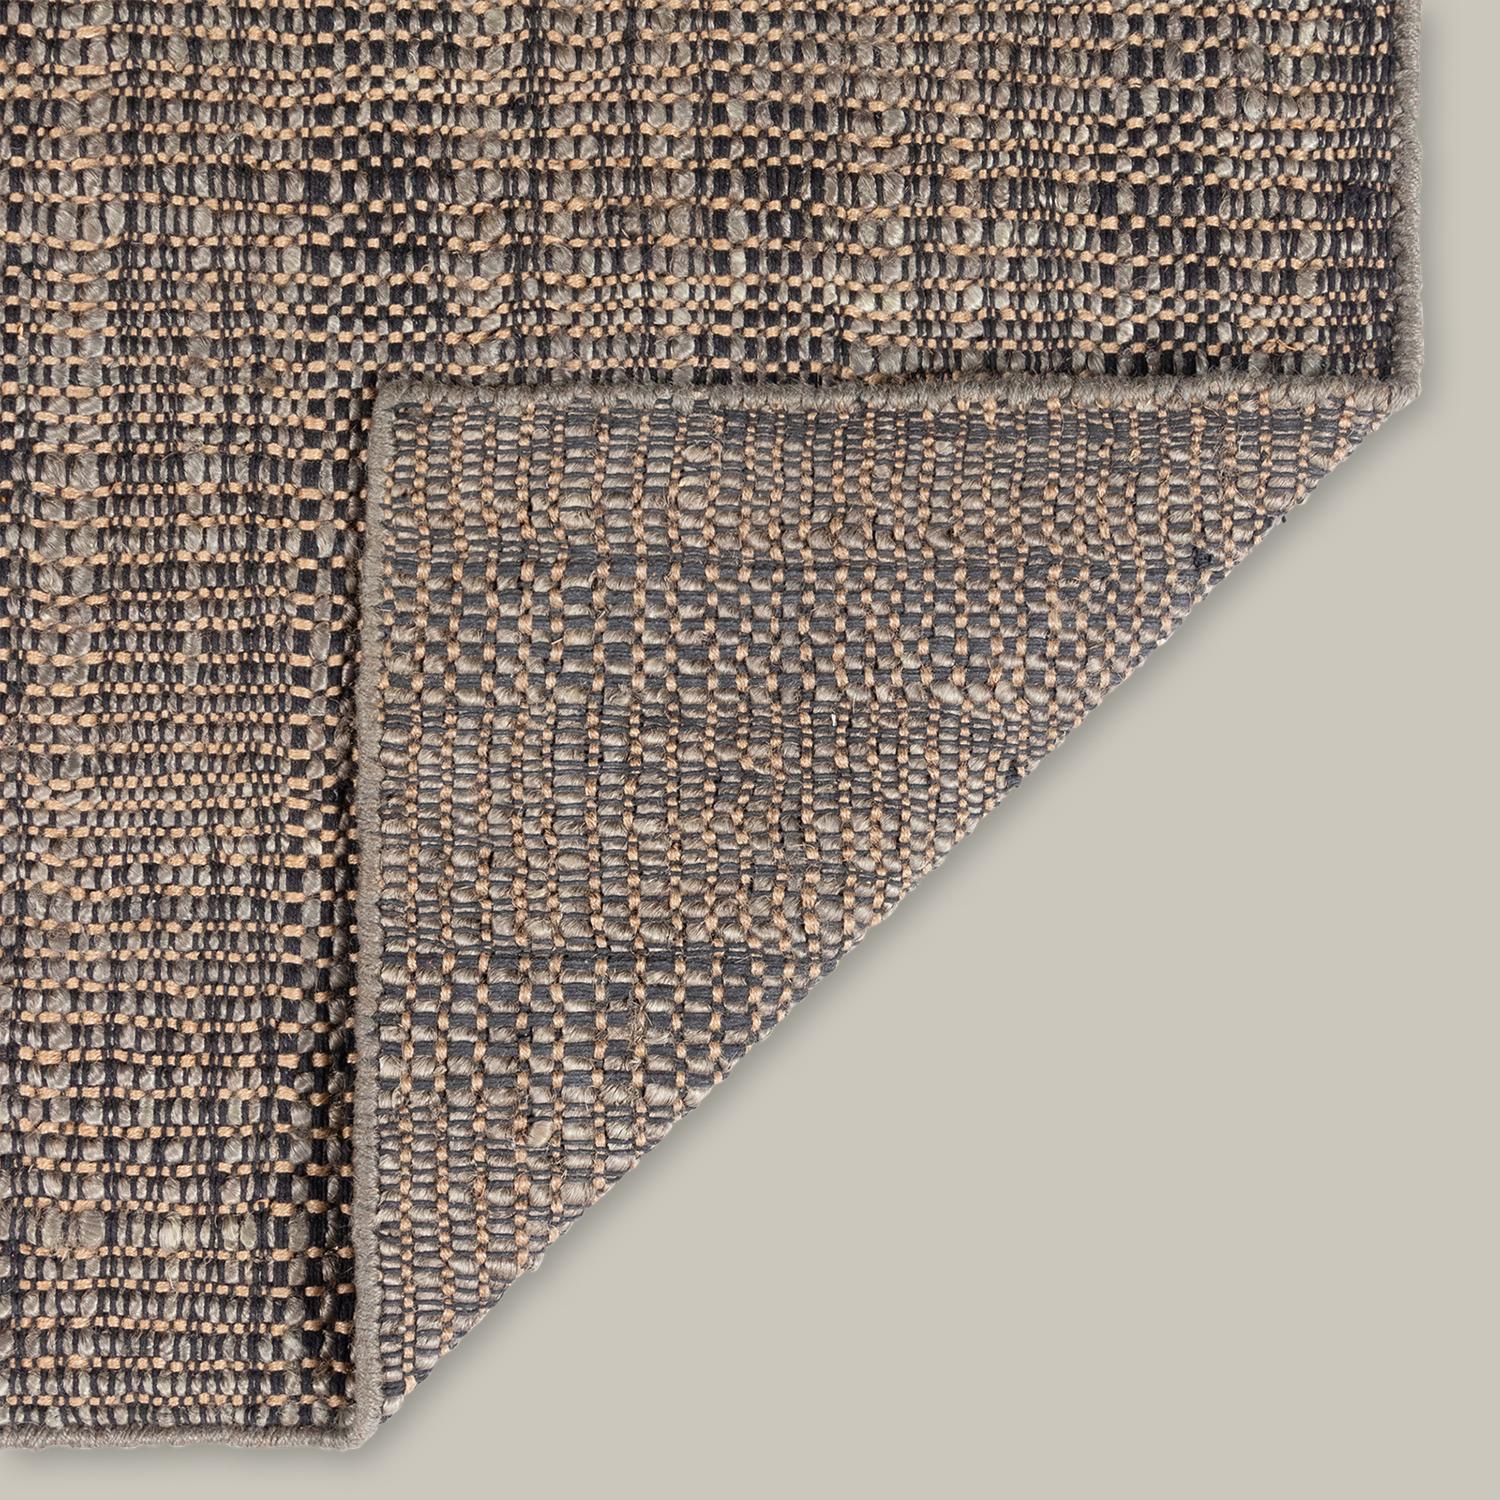 The quality of the line pattern sets the Moghar Collection apart. A handwoven jute flatweave, the subtle gradations of color work together to create an elevated basic. Built for layering, the wonky lines and irregular texture all have a very